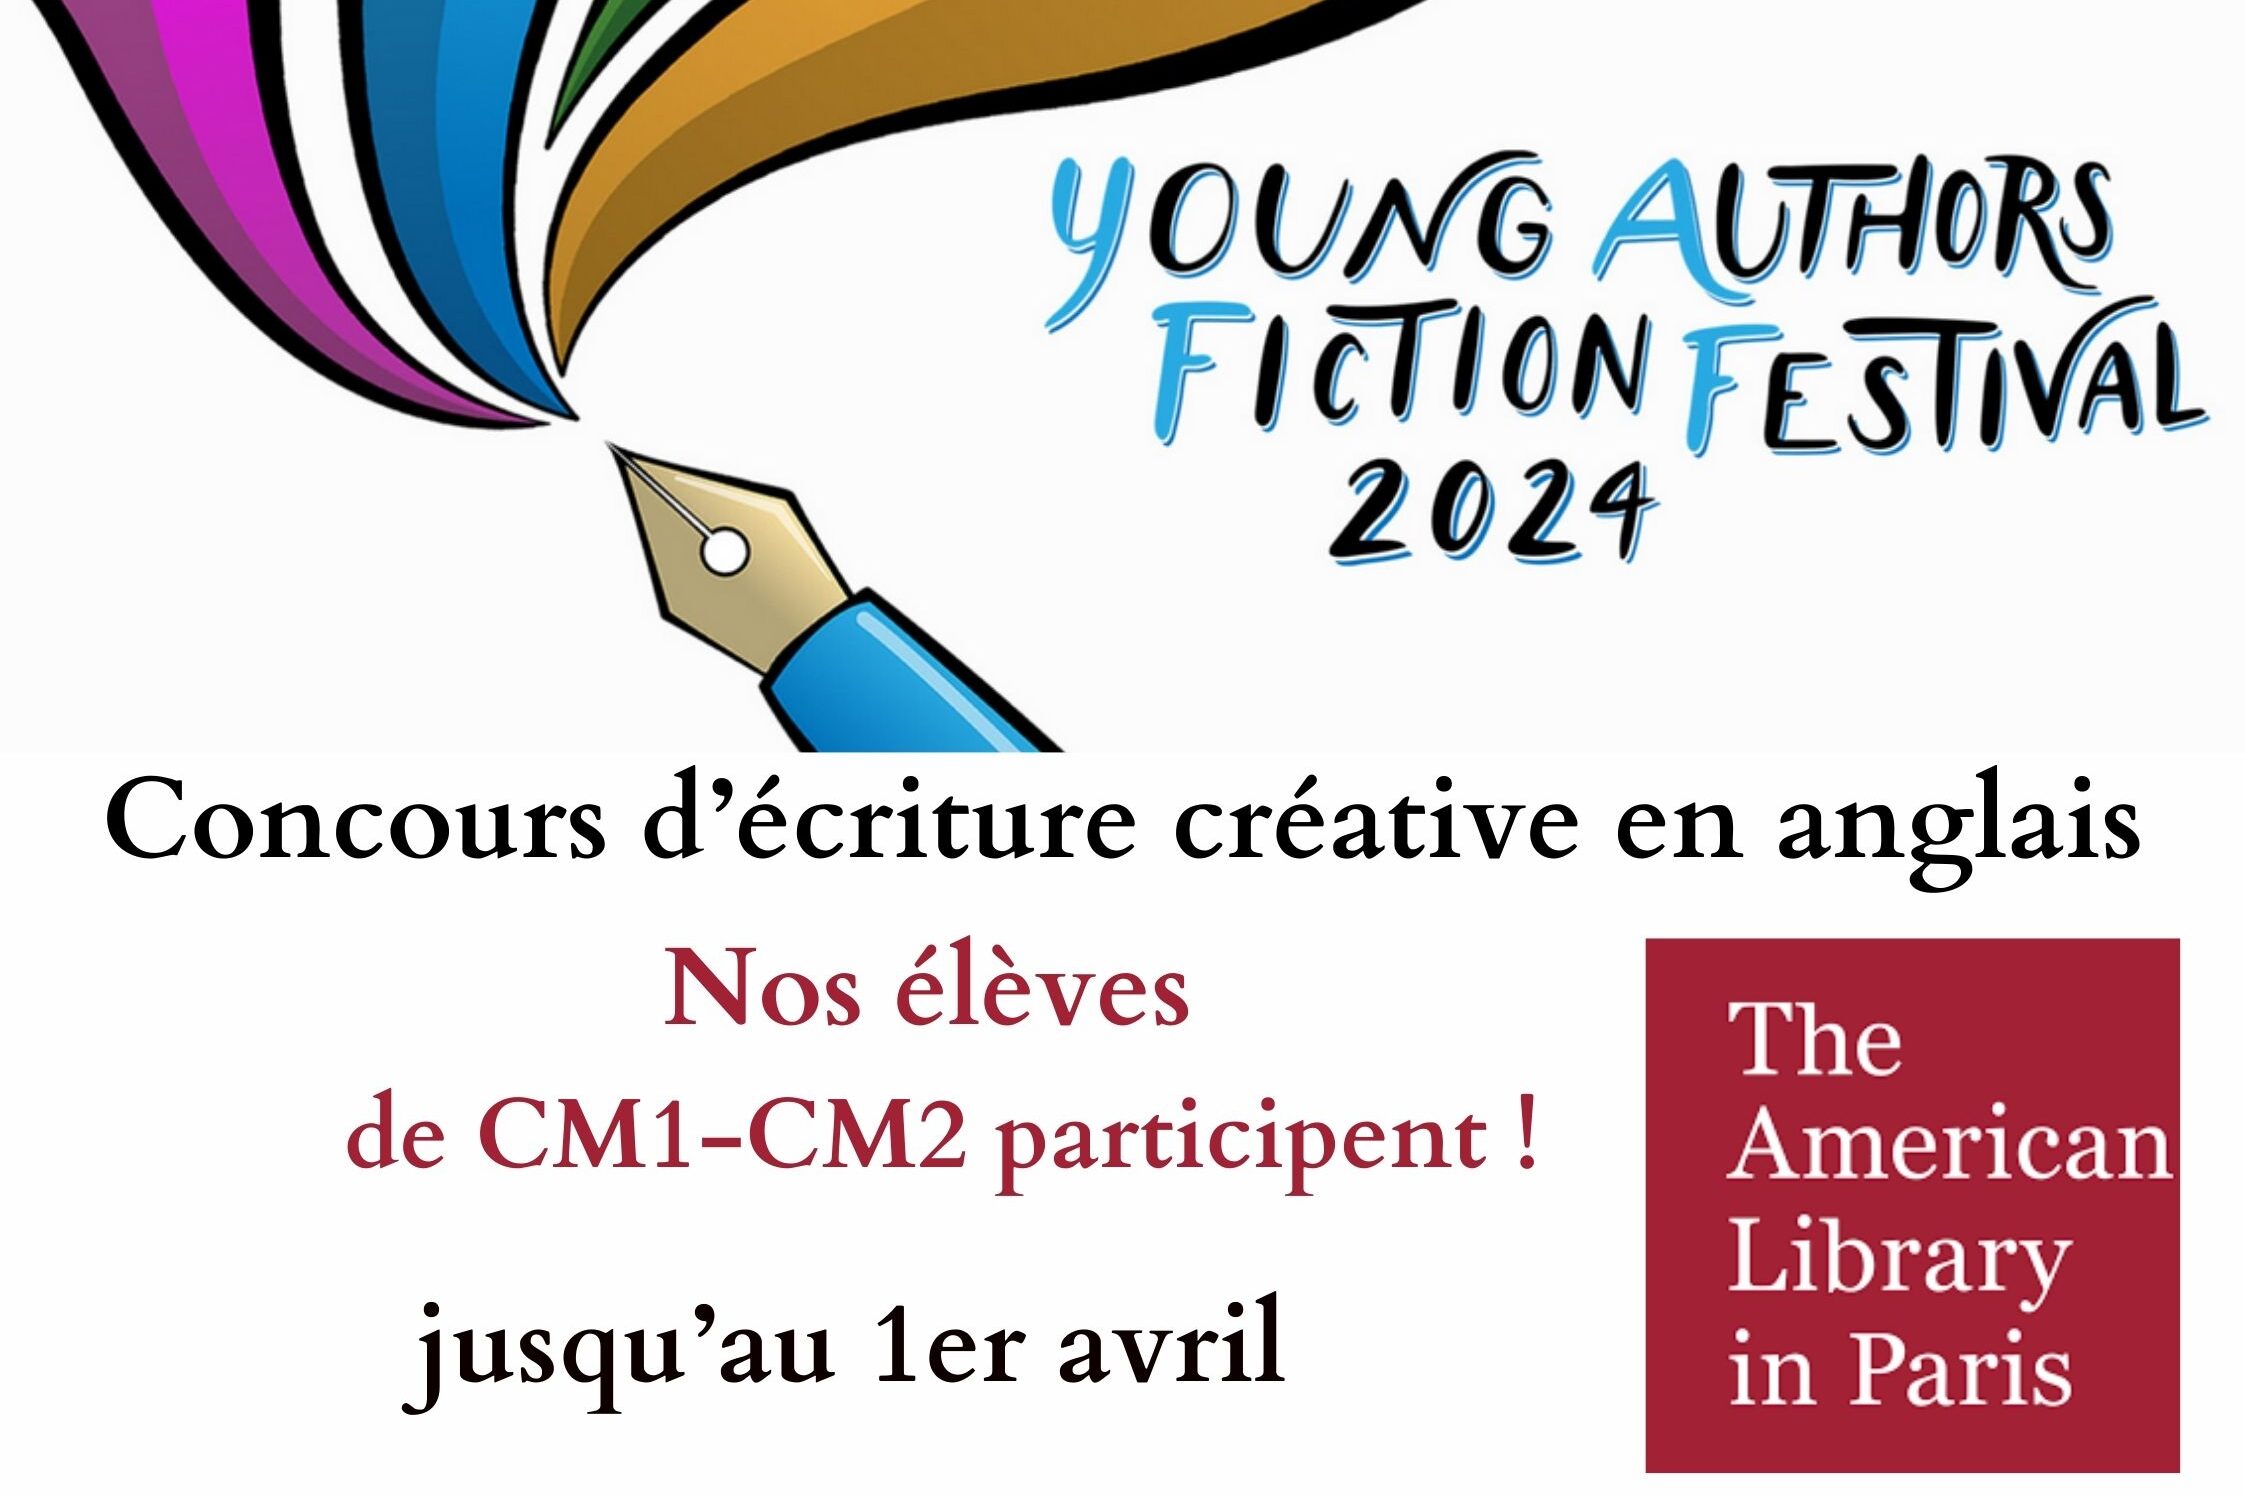 Young Authors Fiction Festival – The American Library in Paris